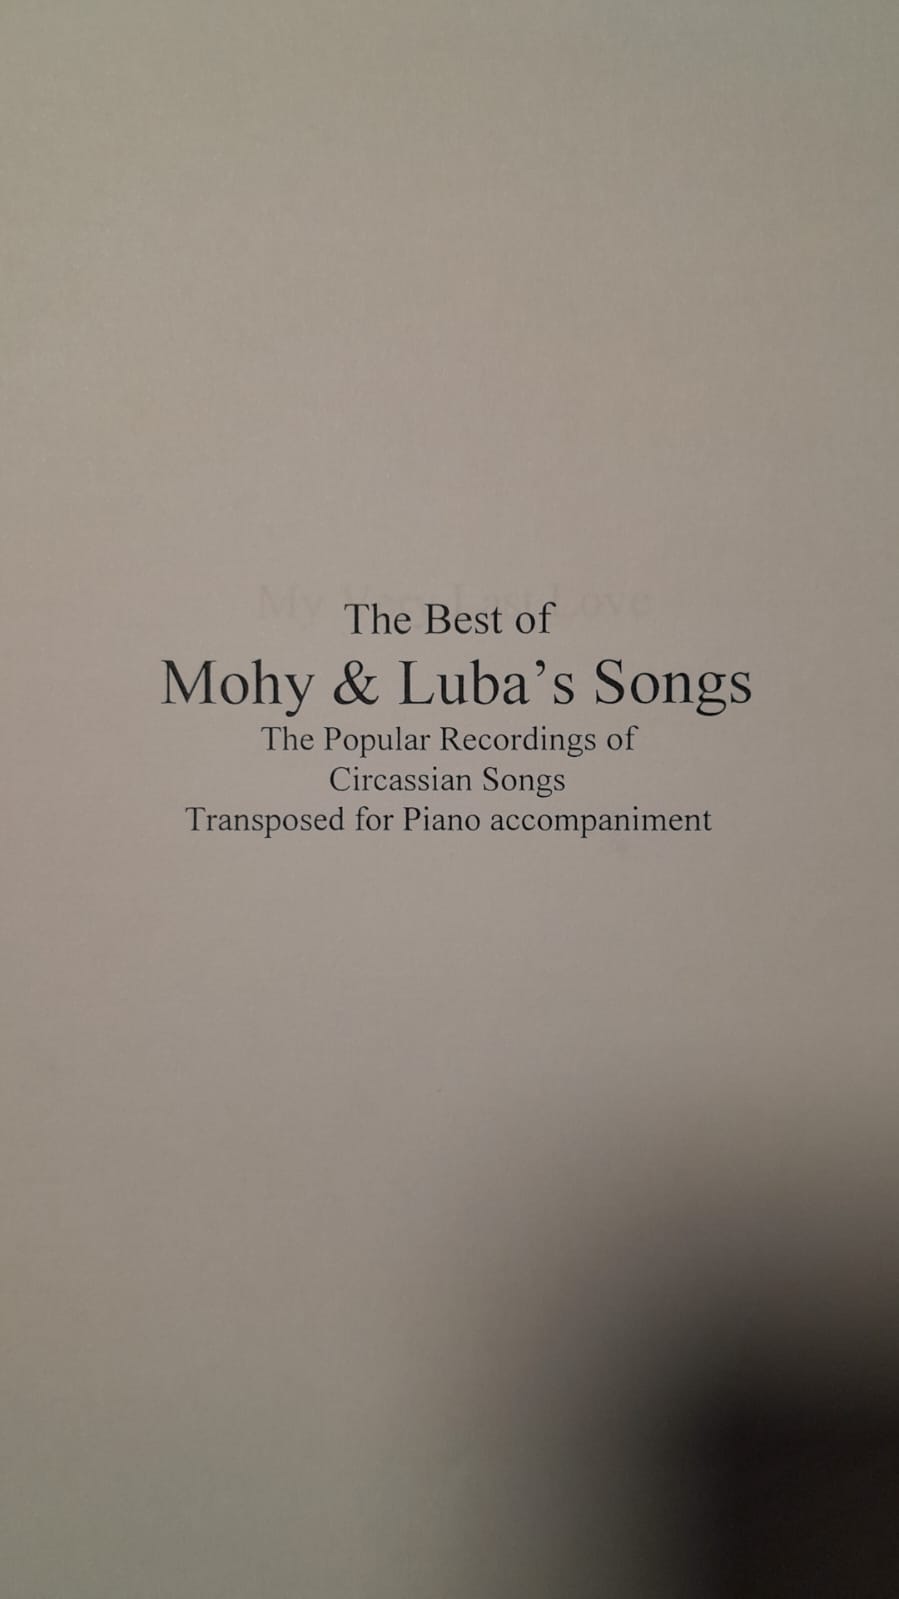 The Best of Mohy & Luba's Songs